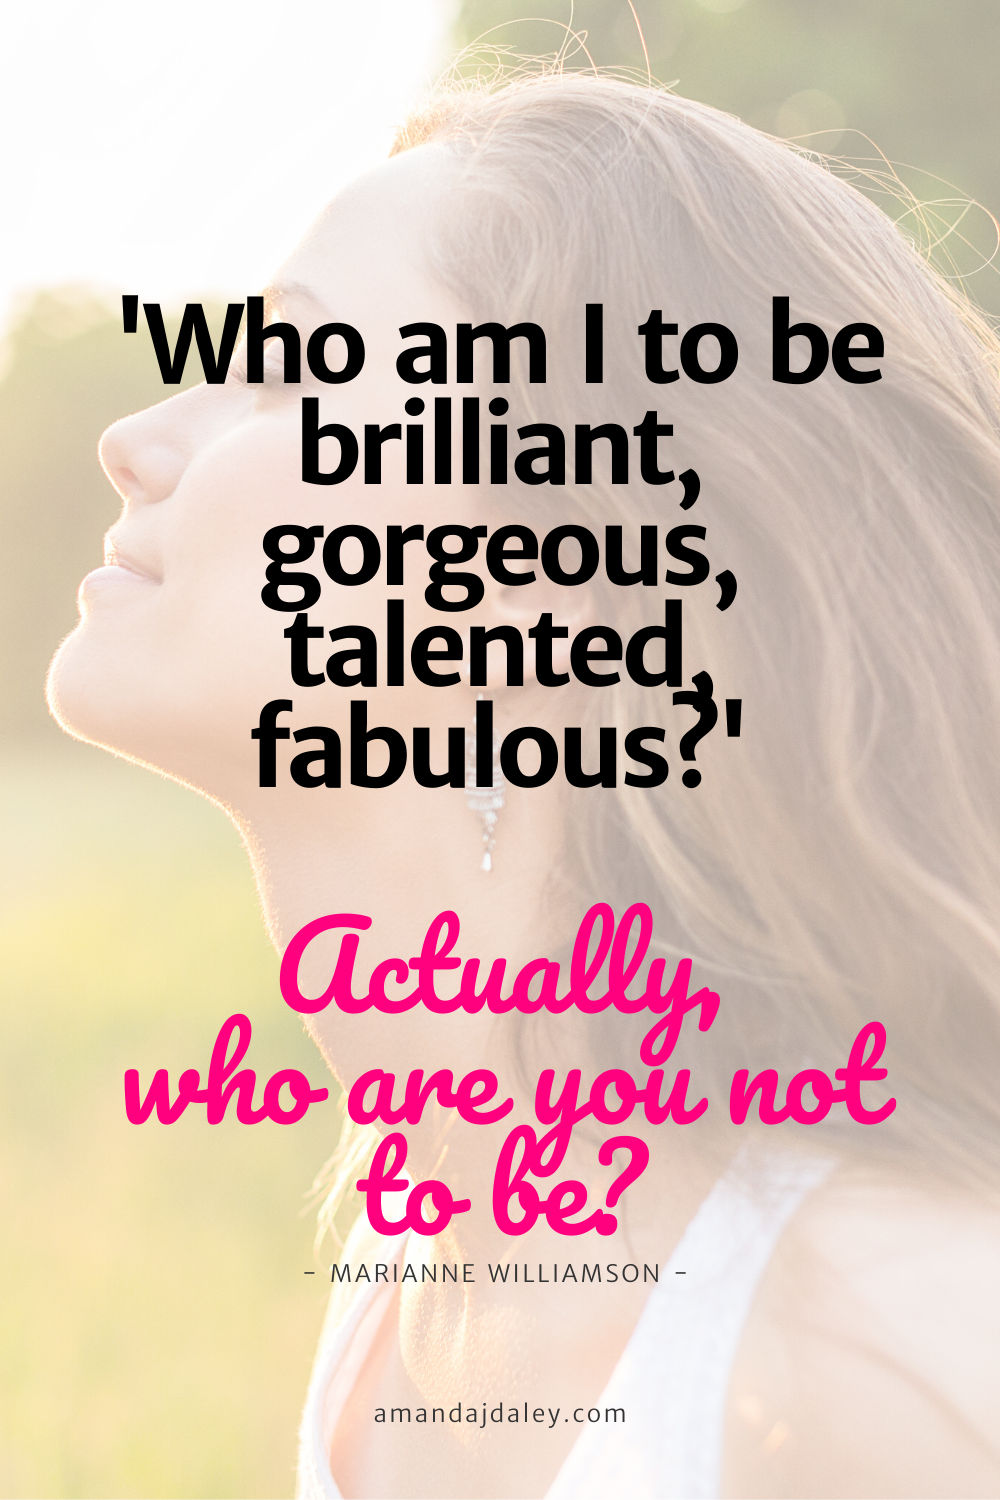 Motivational quote for female entrepreneurs - who are you not to be fabulous - Marianne Williamson.png